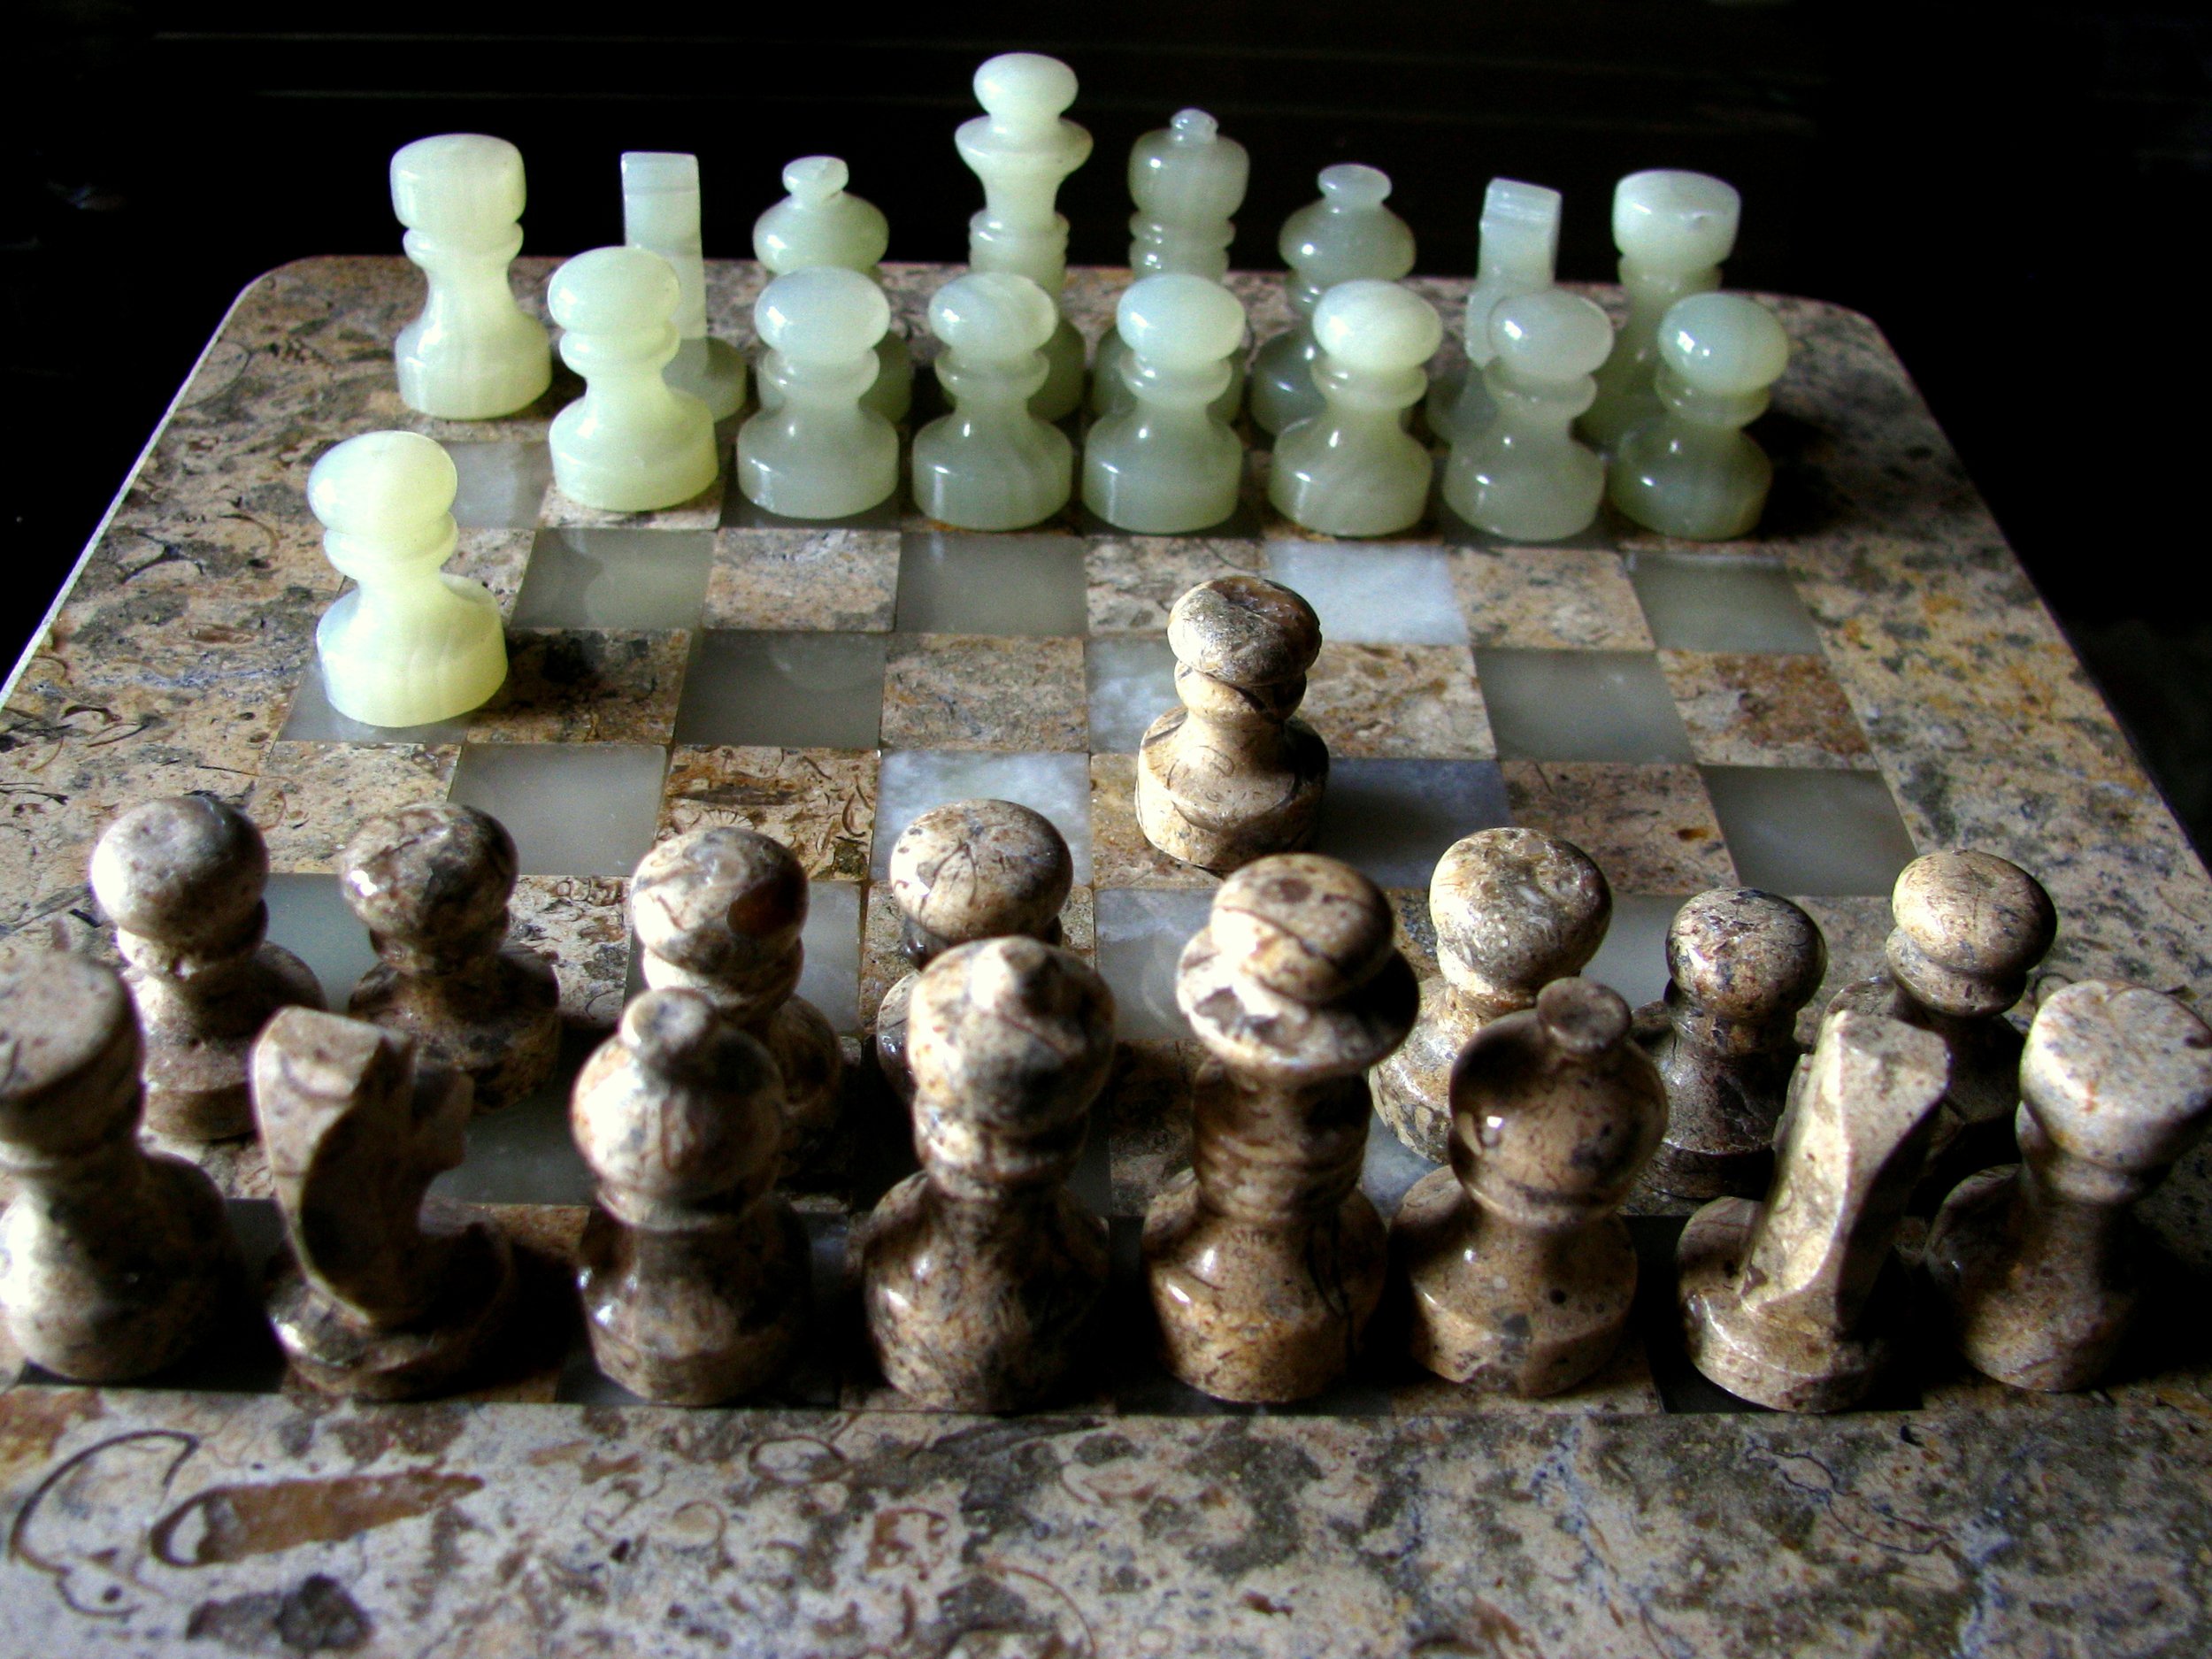 Great chess games – chess-evolution